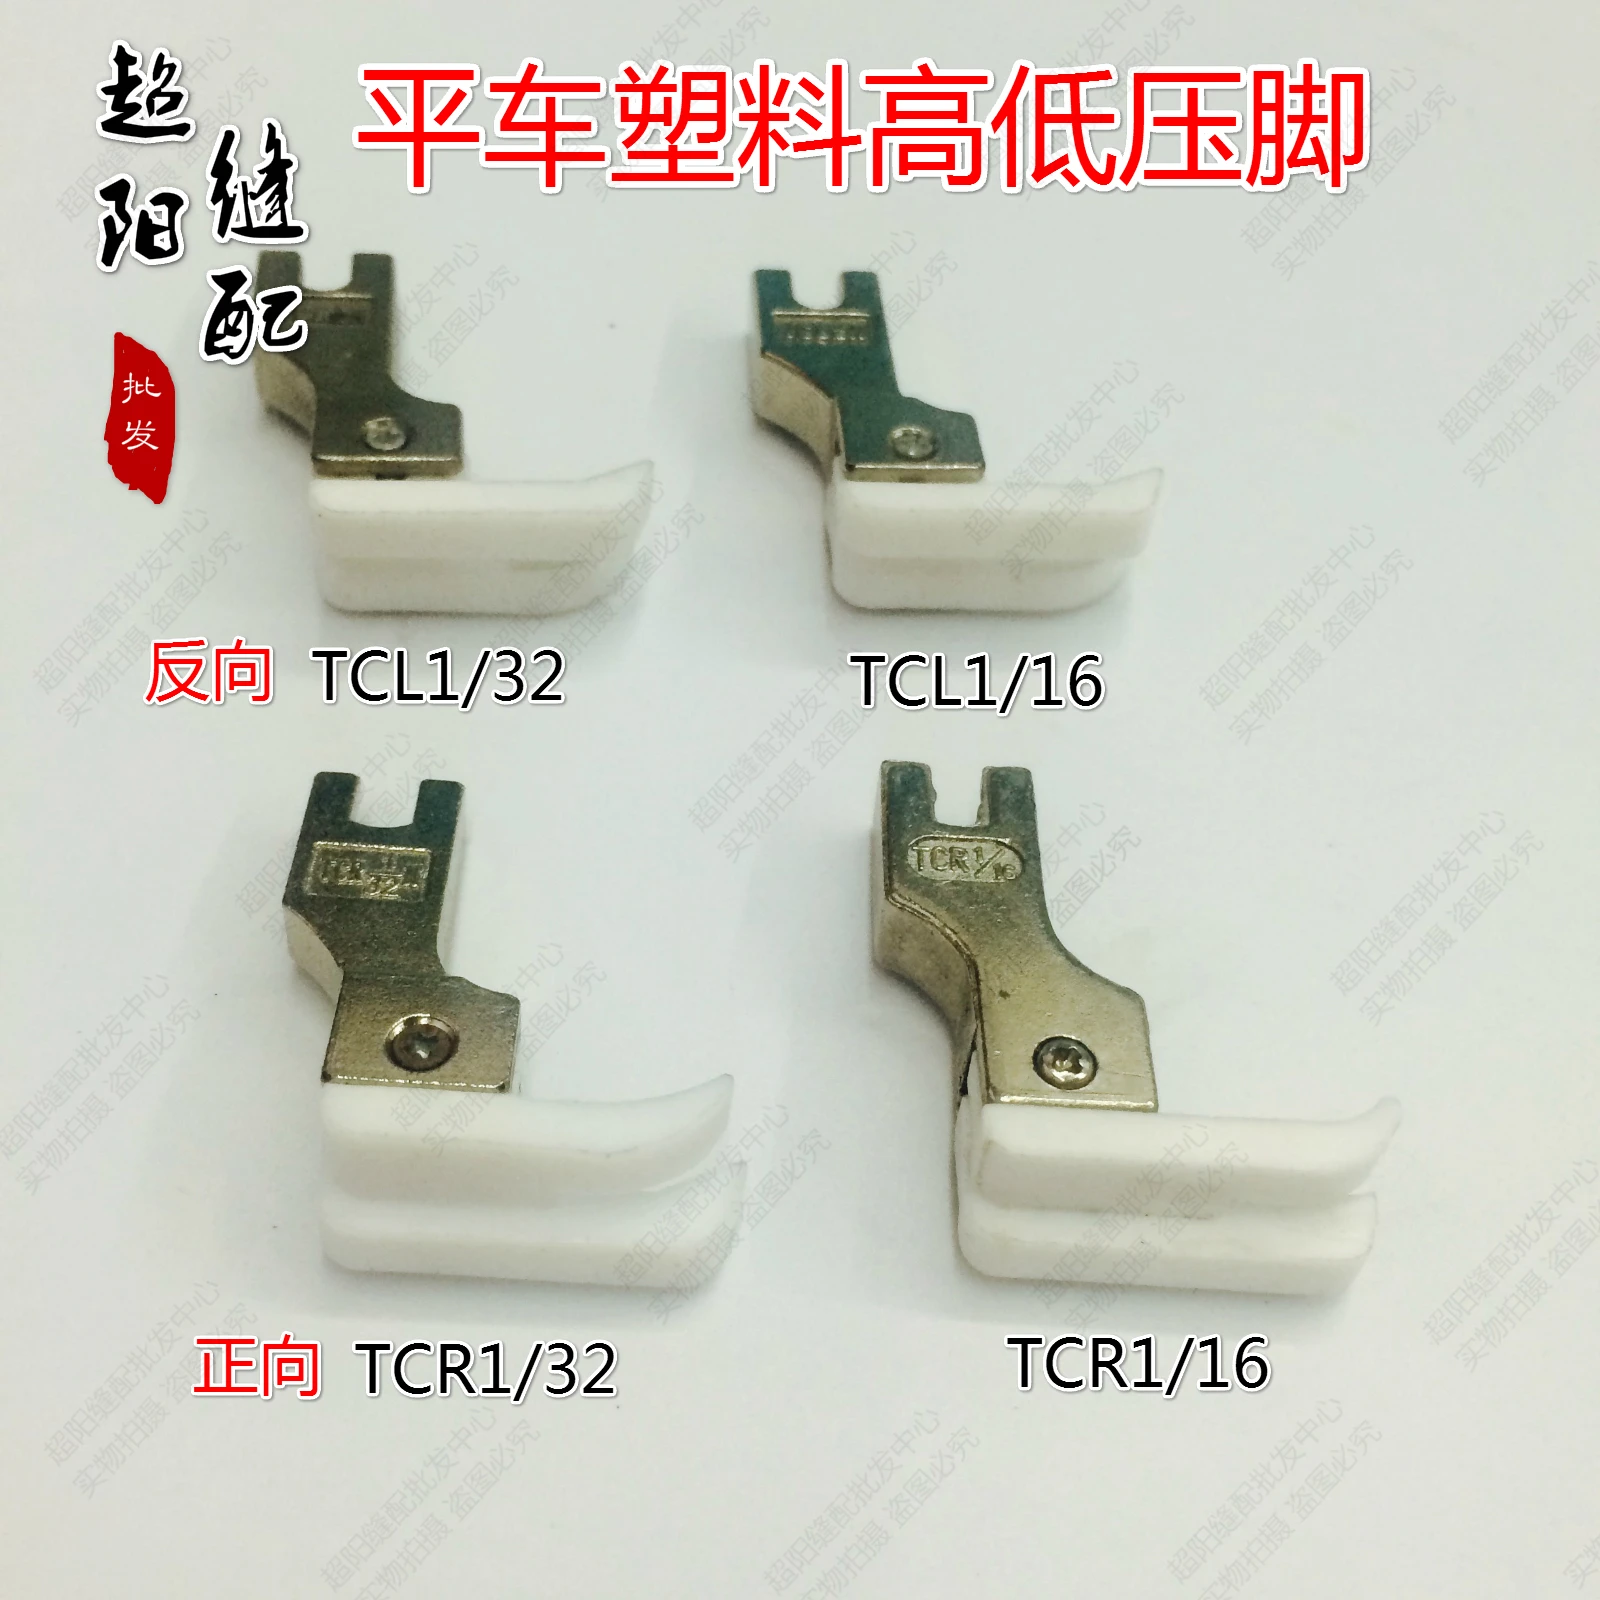 

10ps Industrial sewing machines General pressure plastic high and low pressure foot stop 0.1 0.2 TCR1/32N TCL1/16 foot press paw